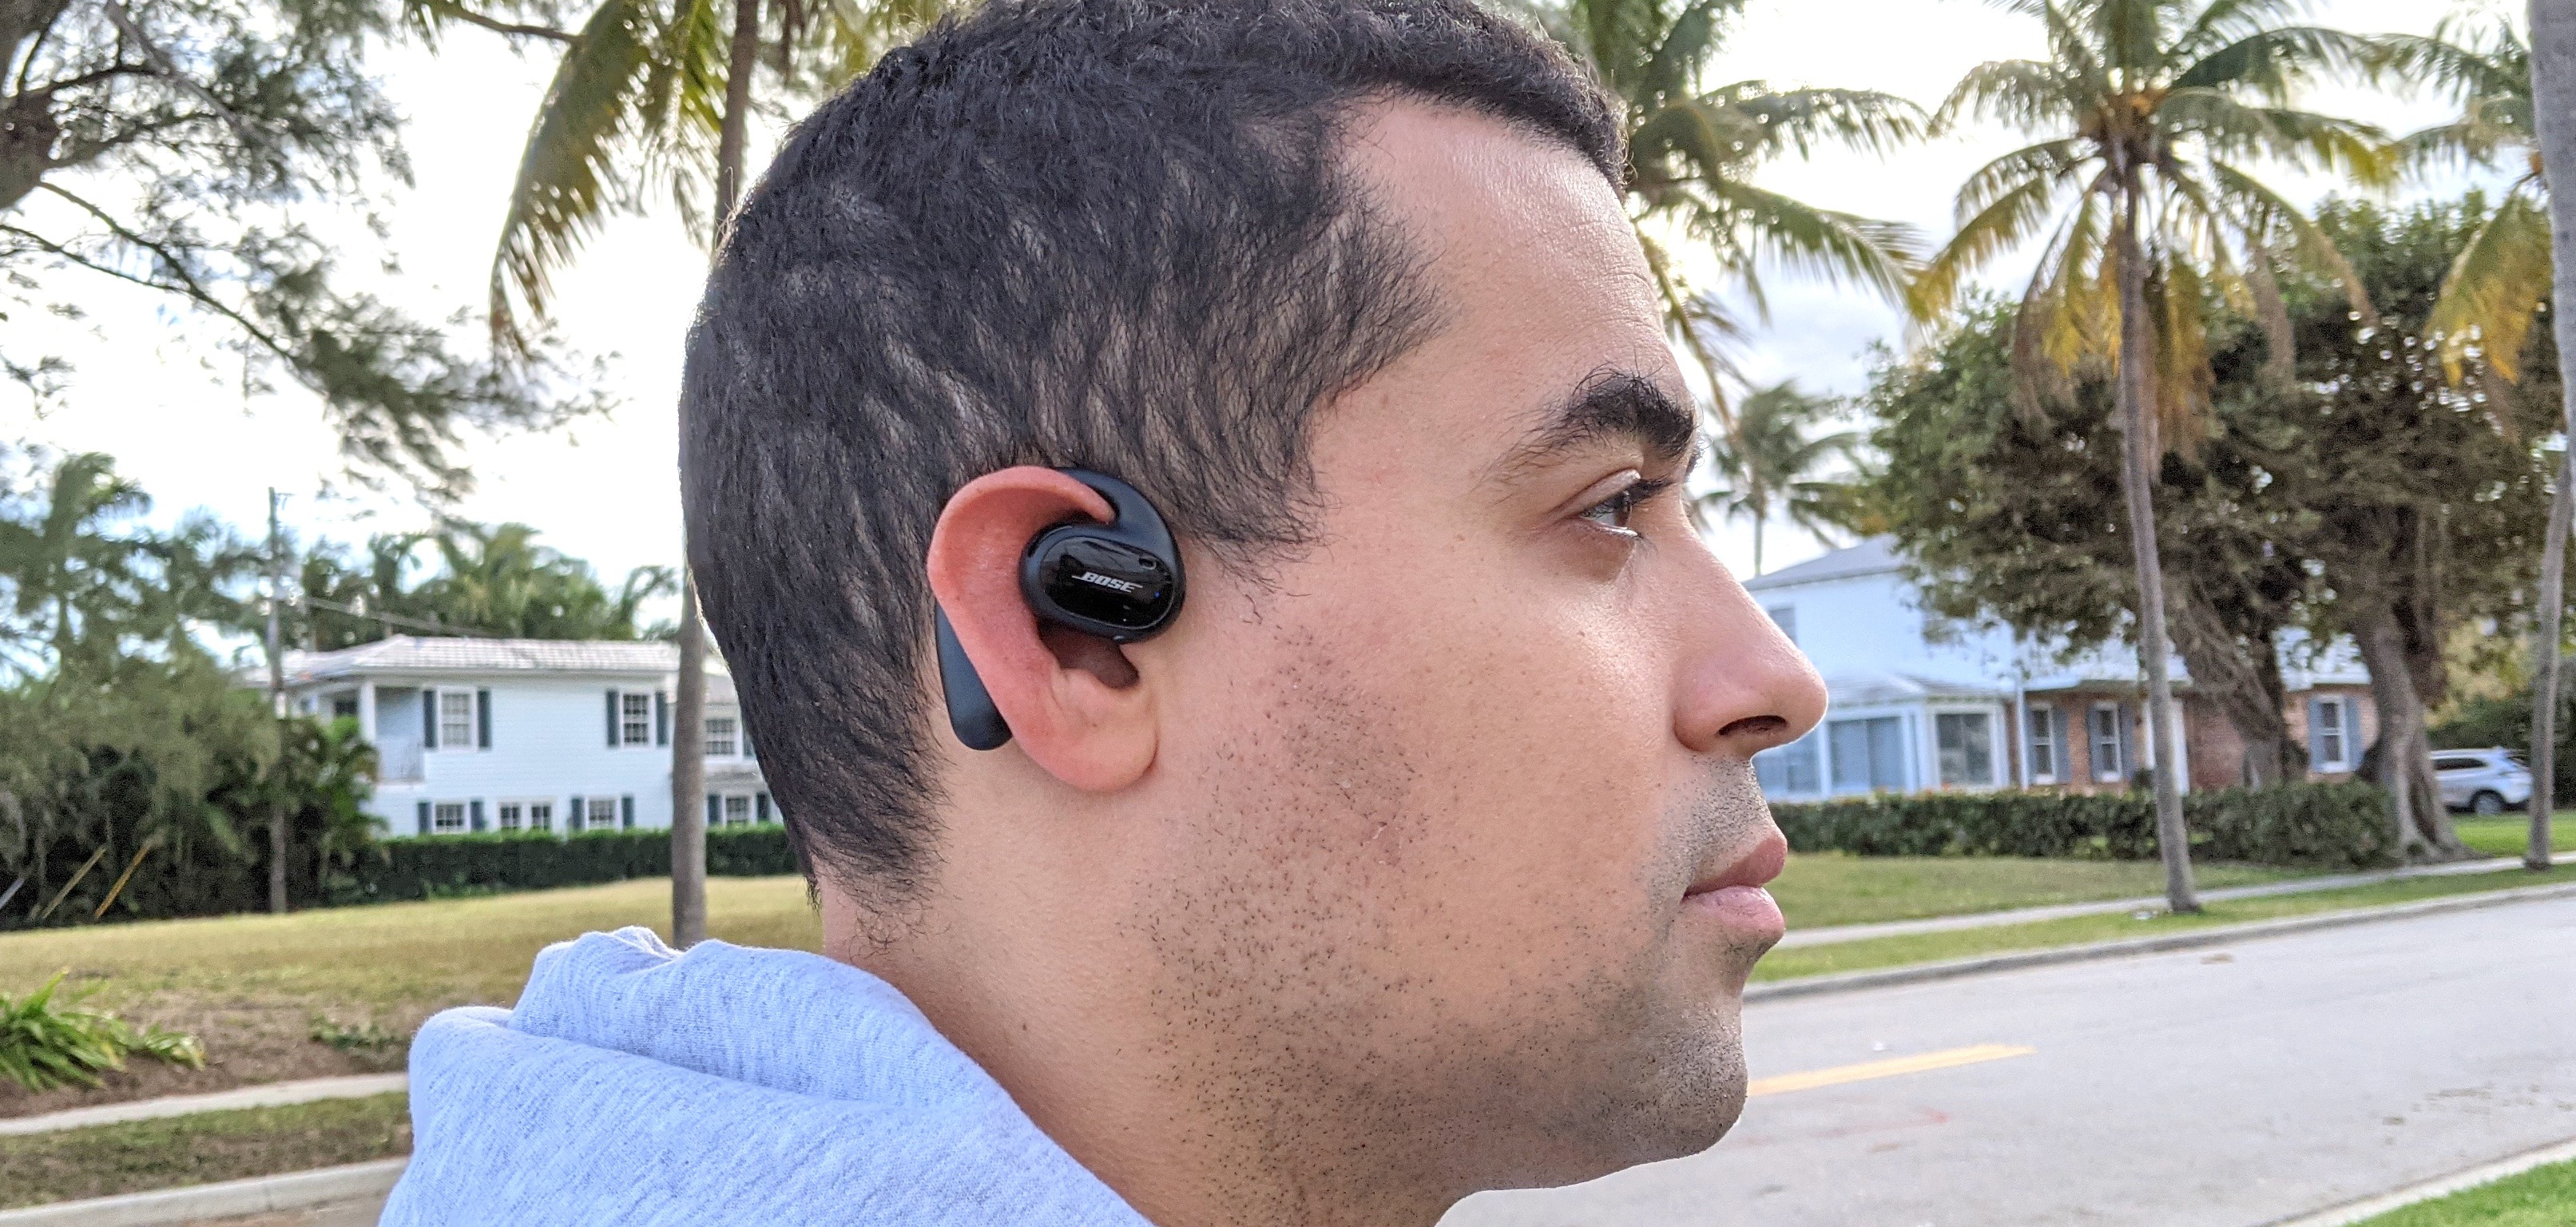 Sorry, but open wireless earbuds are stupid – here's why